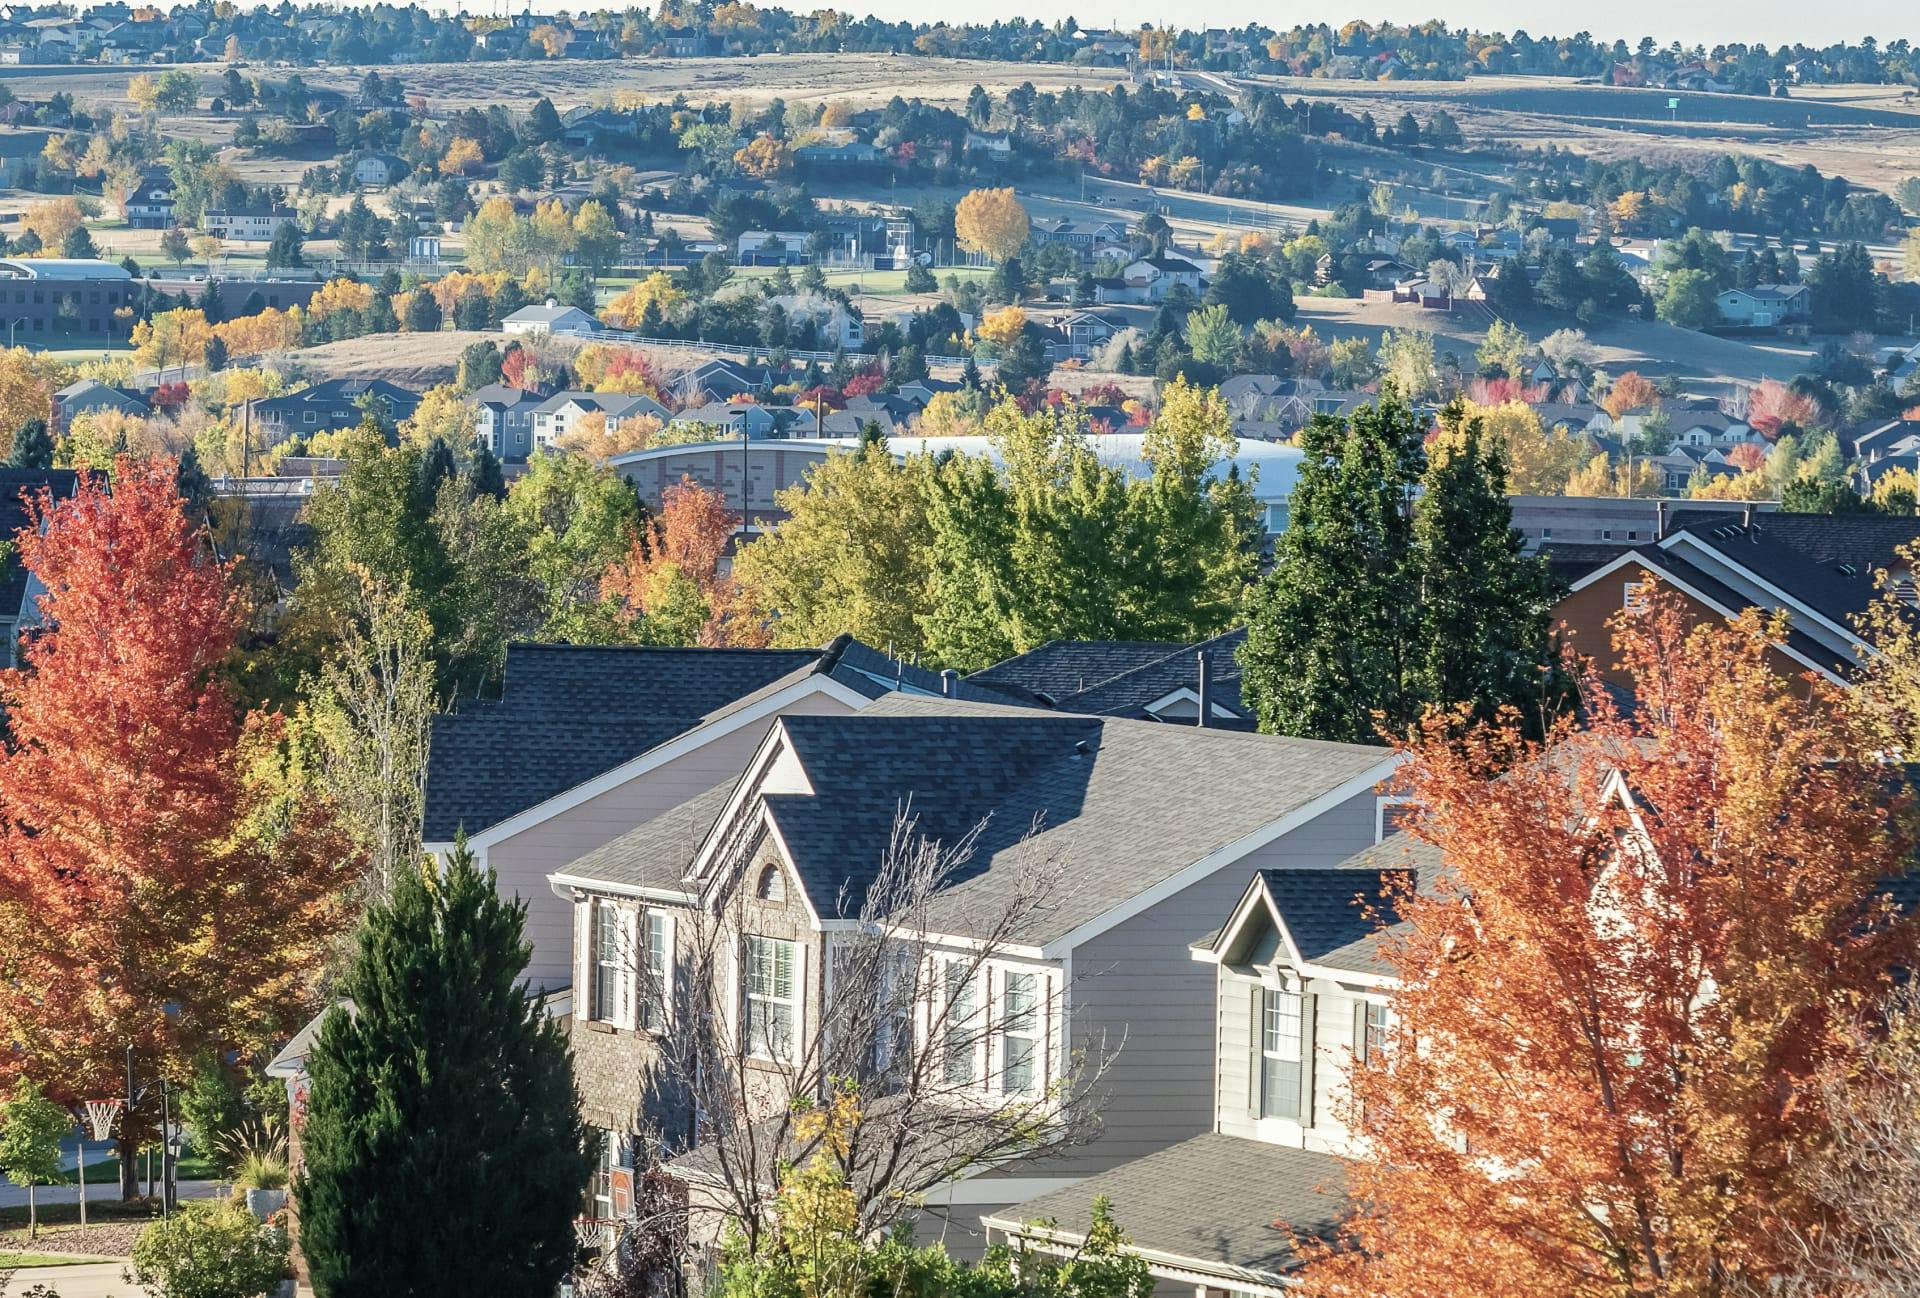 trees are in the foreground of a residential neighborhood with a hillside in the background